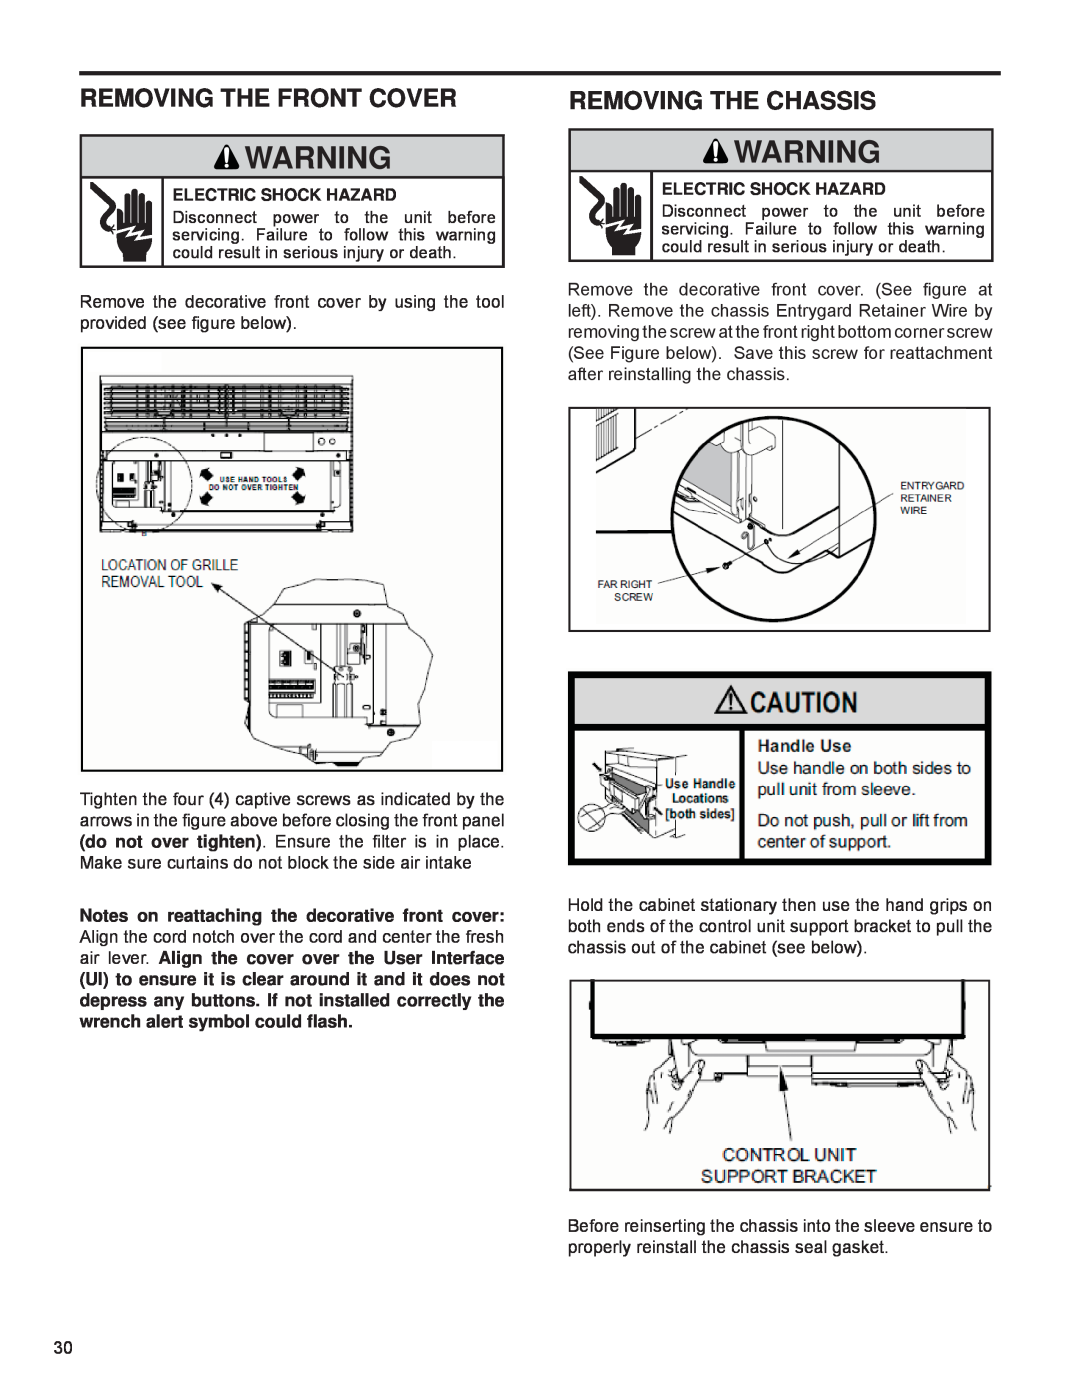 Friedrich R-410A service manual Removing The Front Cover, Removing The Chassis, Electric Shock Hazard 